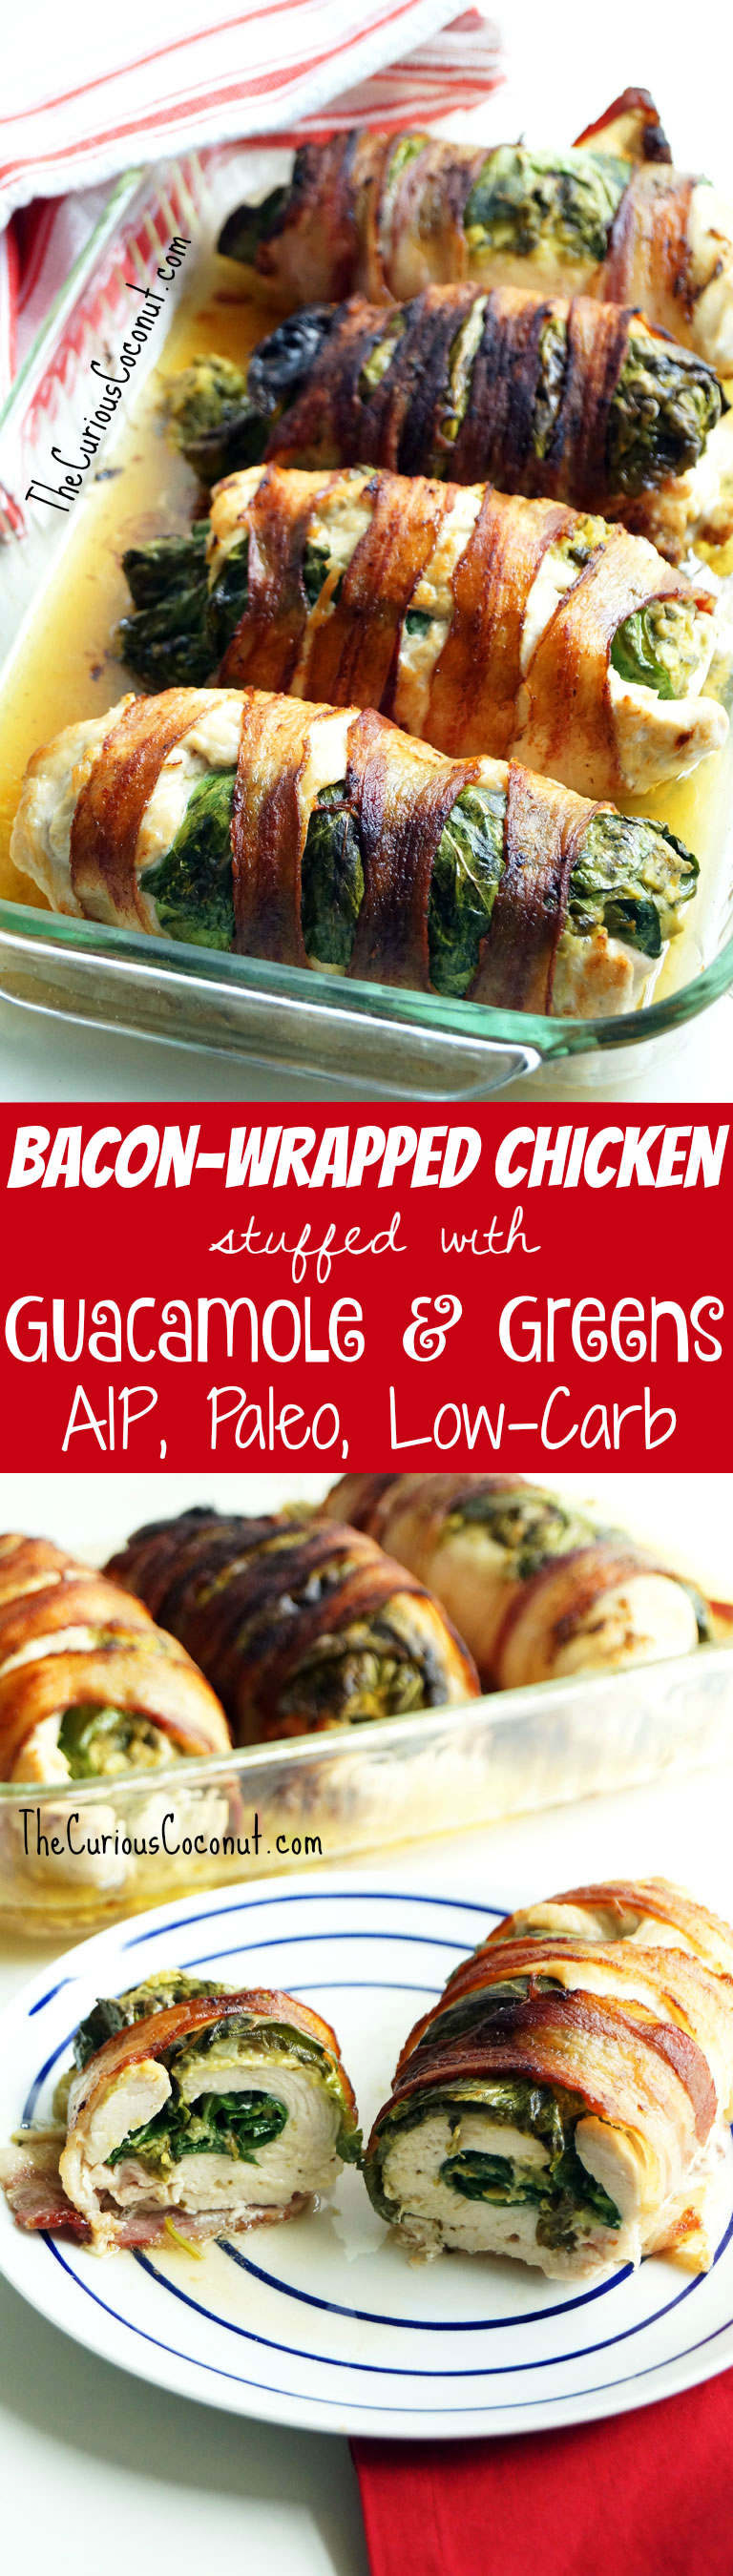 Bacon-Wrapped Chicken Breast Stuffed With Guacamole and Collard Greens - an epic low-carb, #AIP, Paleo meal! Serve with tostones for a starch option // TheCuriousCoconut.com